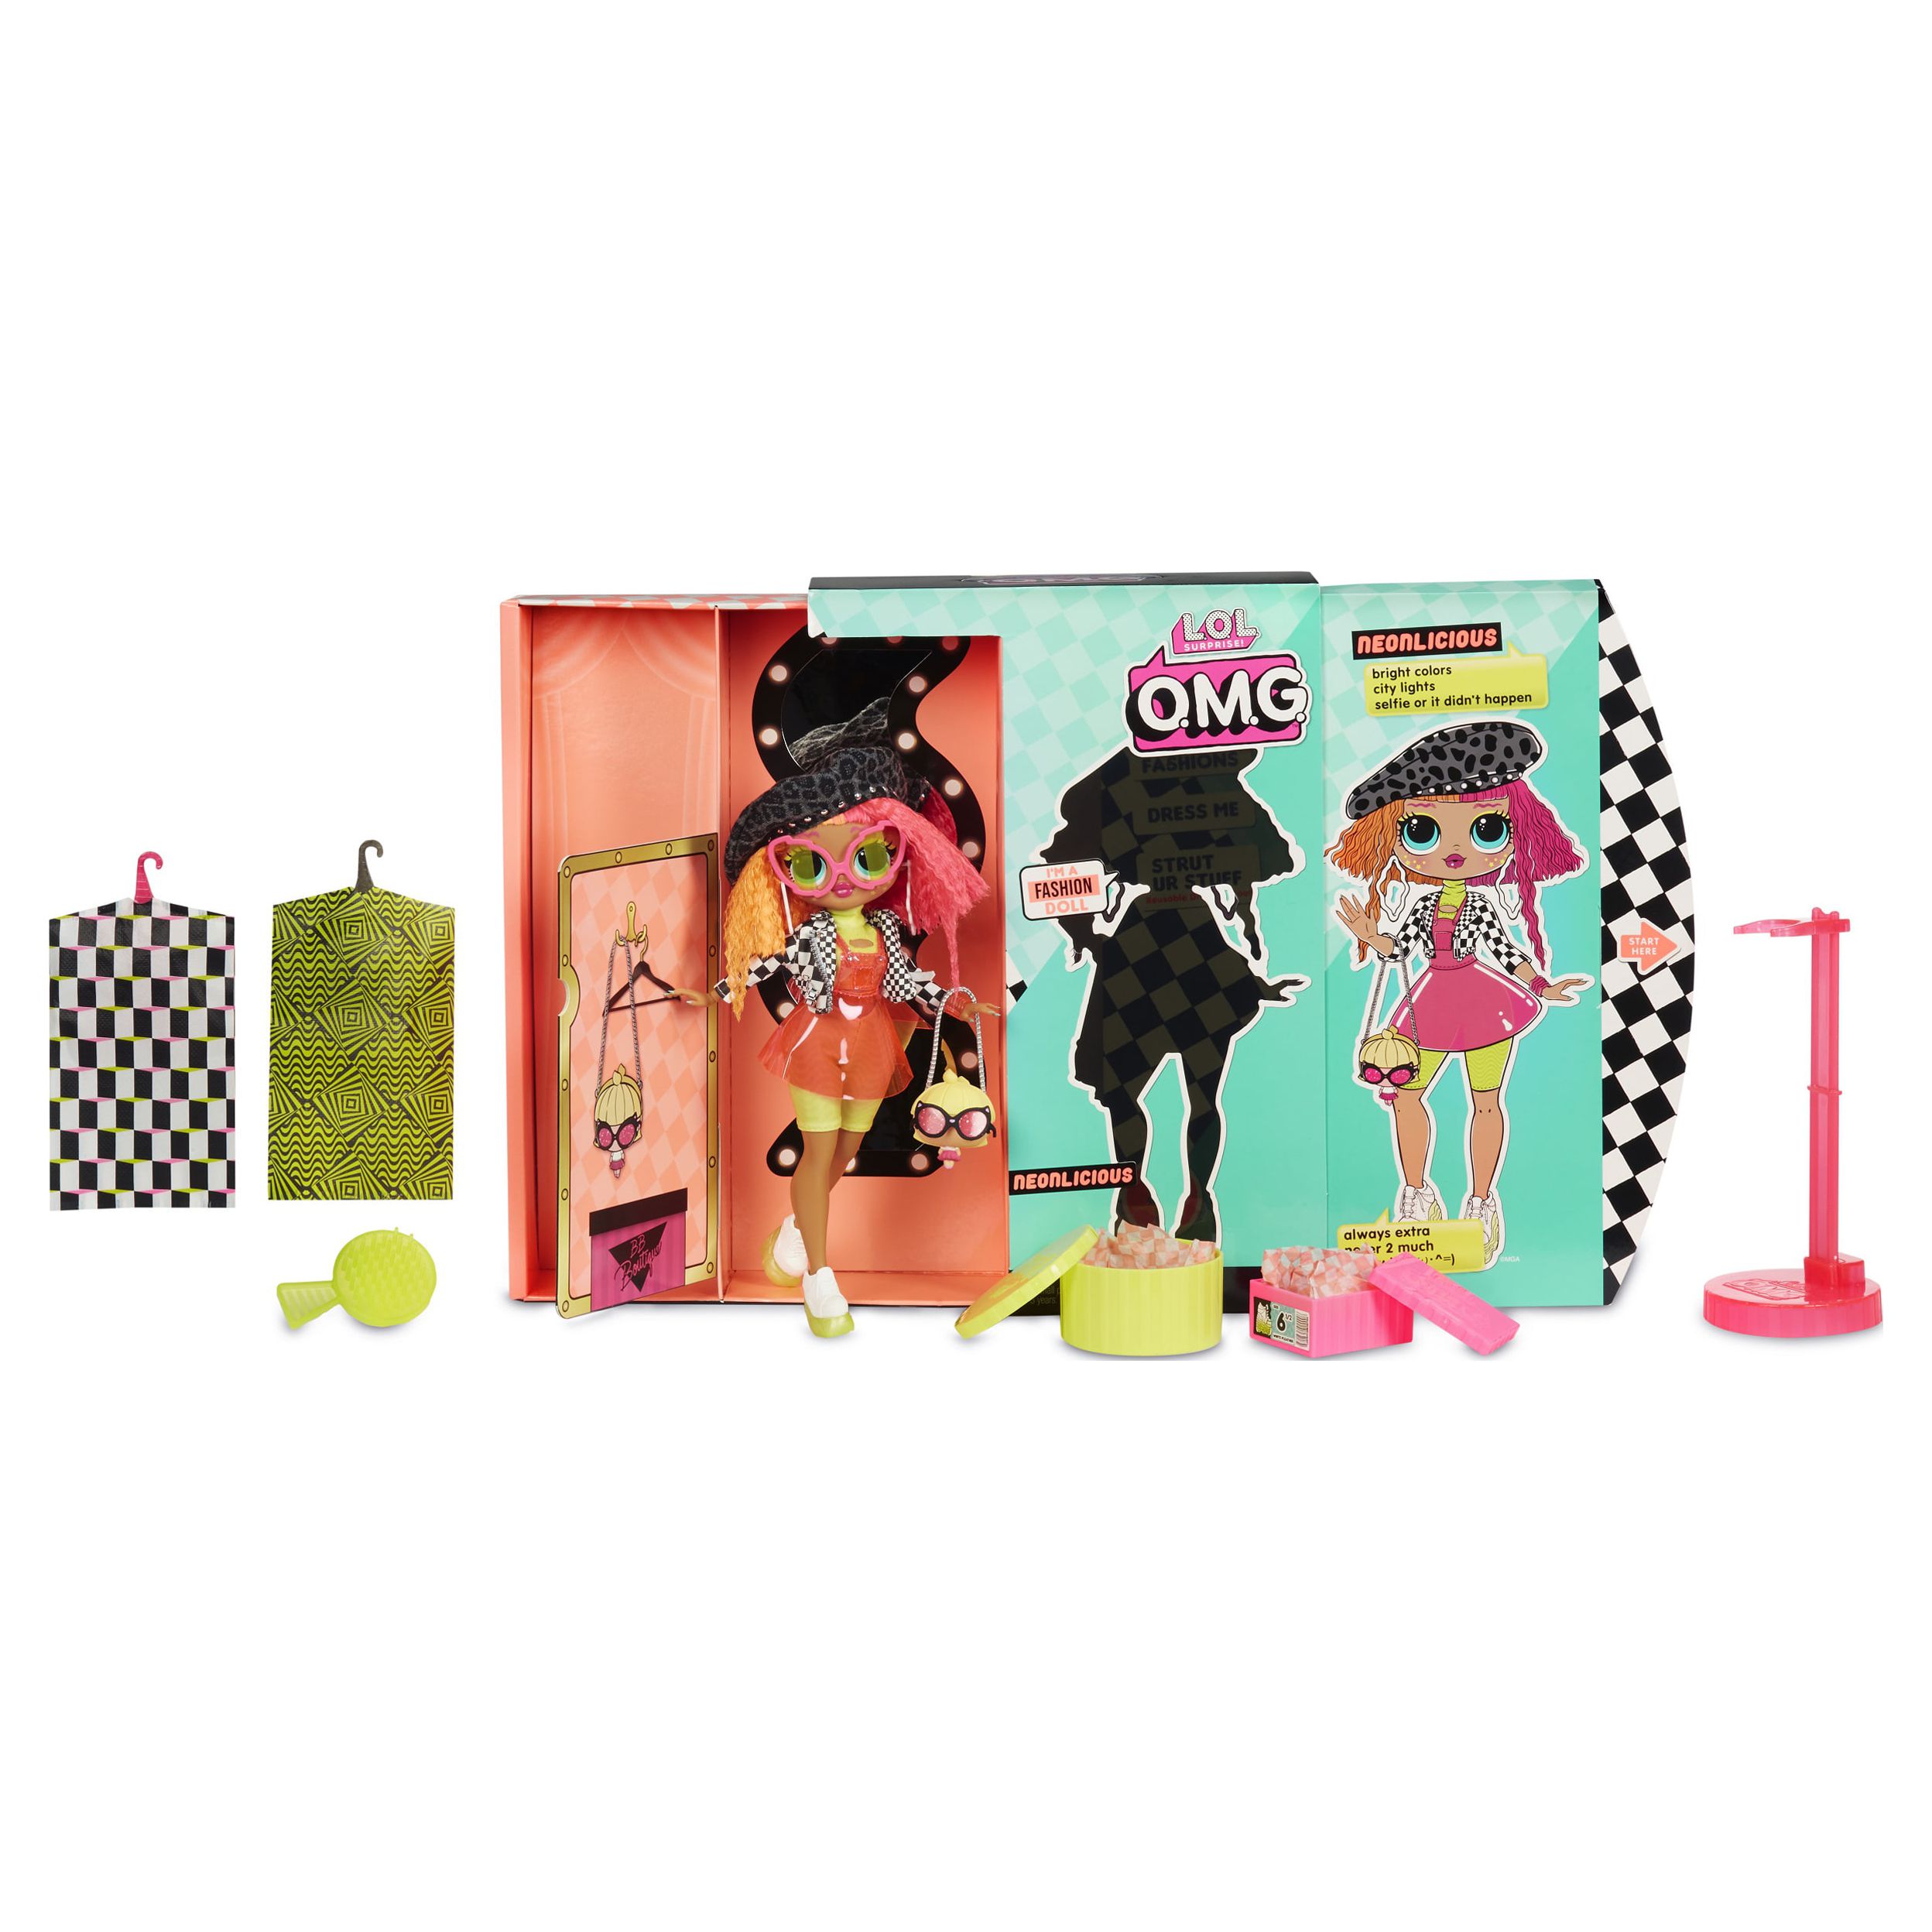 LOL Surprise OMG Neonlicious Fashion Doll With 20 Surprises, Great Gift for Kids Ages 4 5 6+ - image 5 of 7